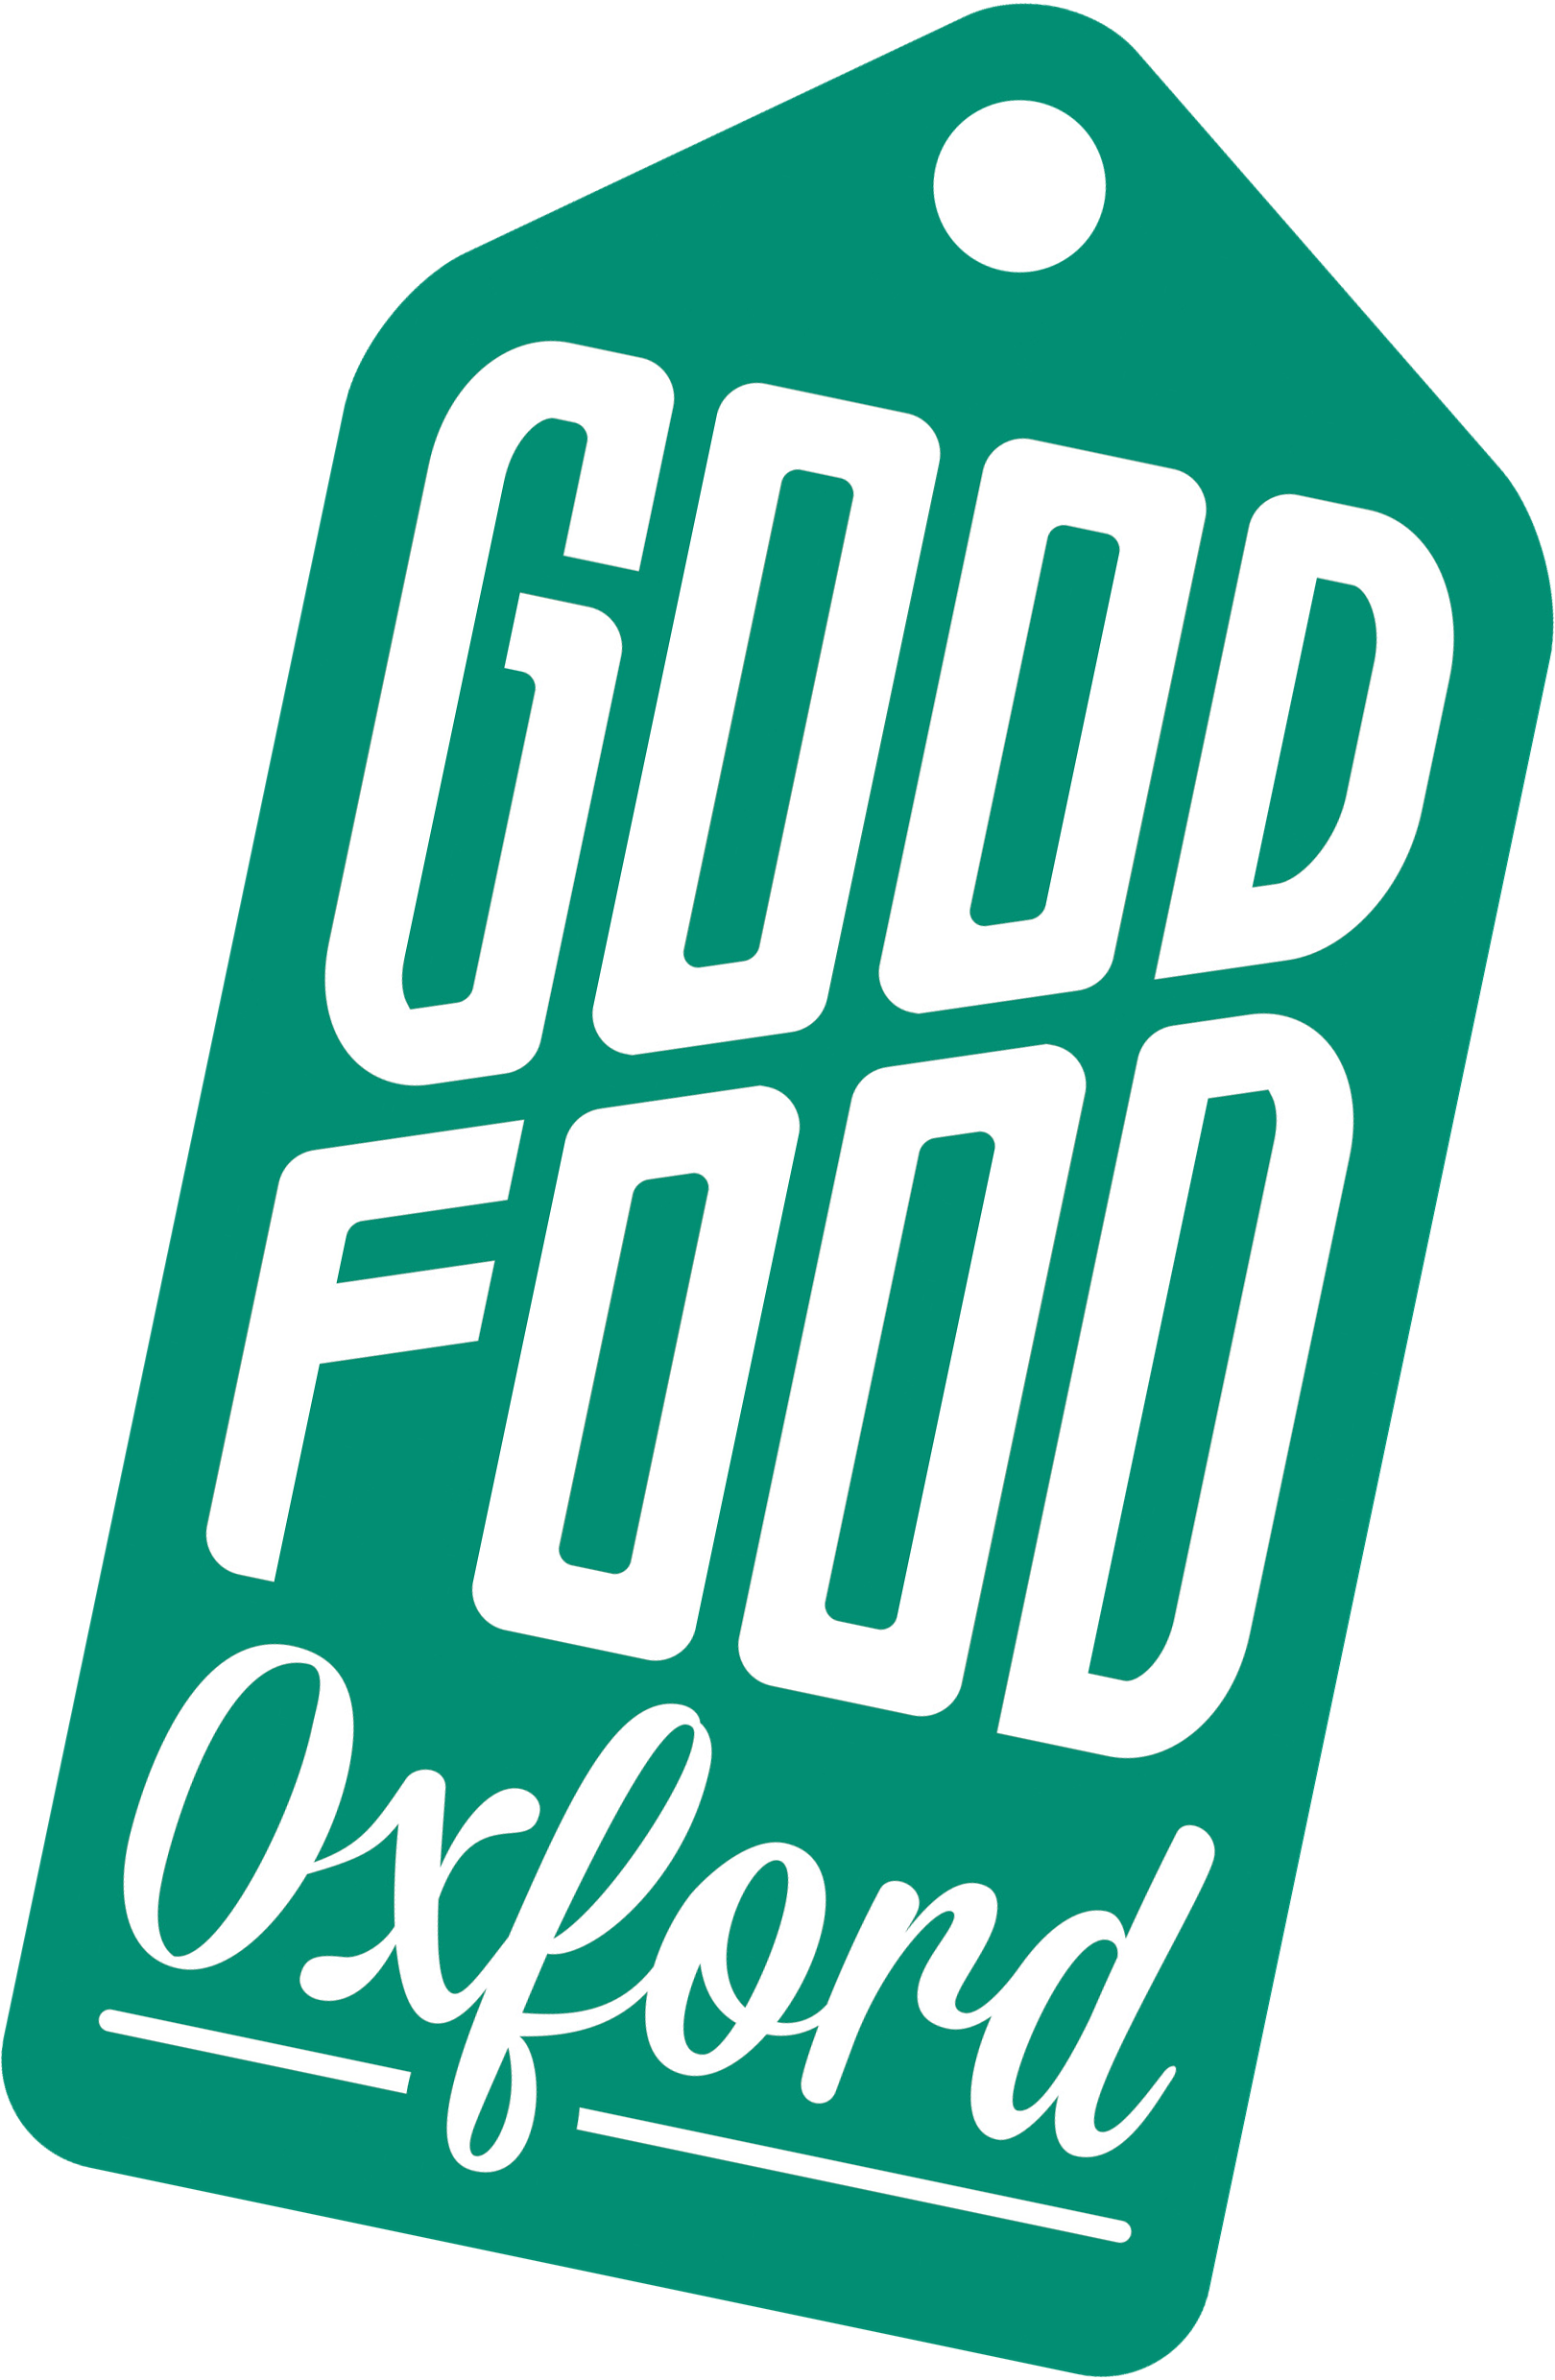 logo for Good Food Oxfordshire